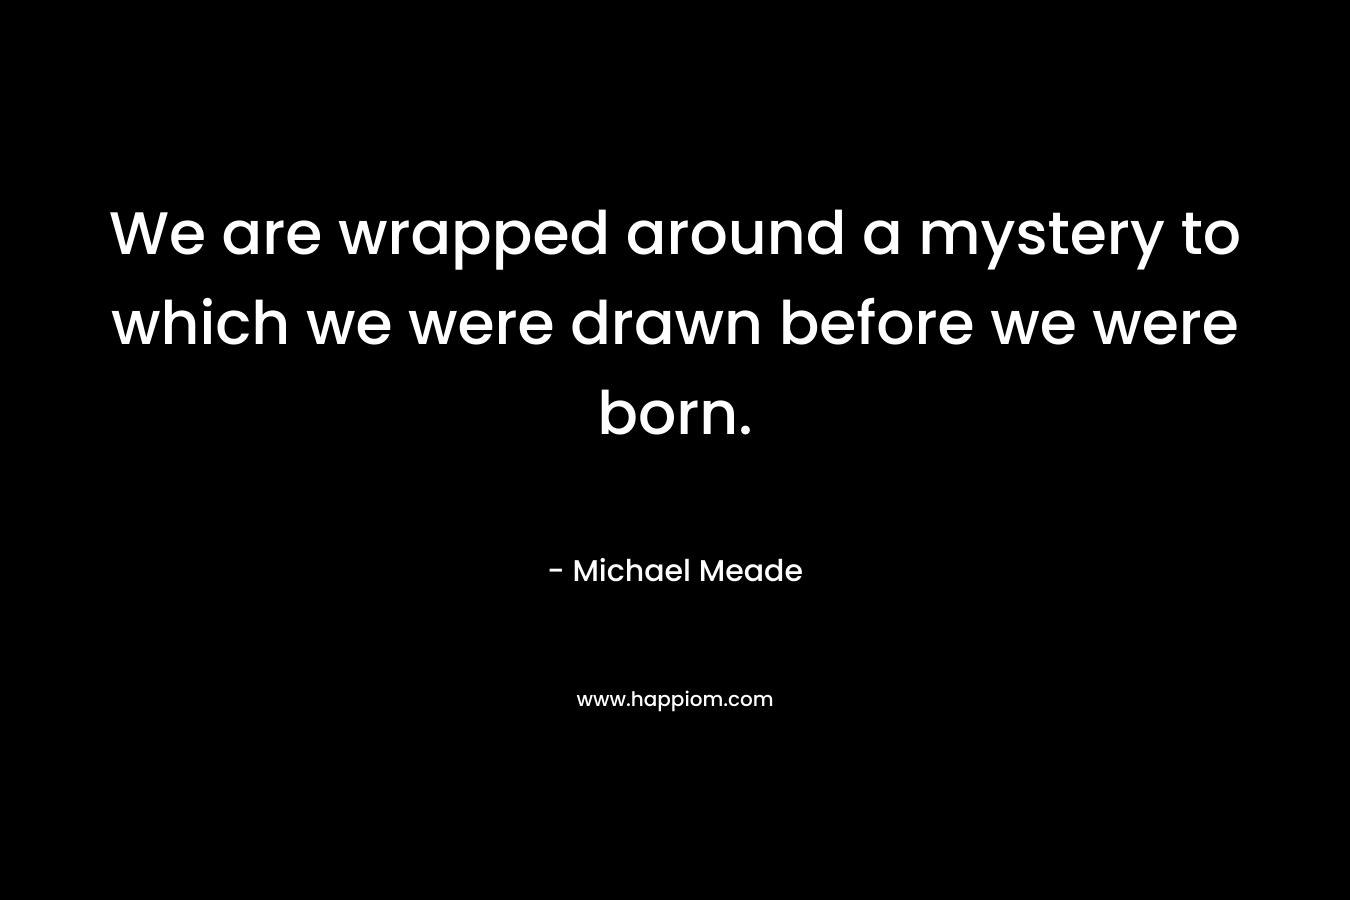 We are wrapped around a mystery to which we were drawn before we were born.